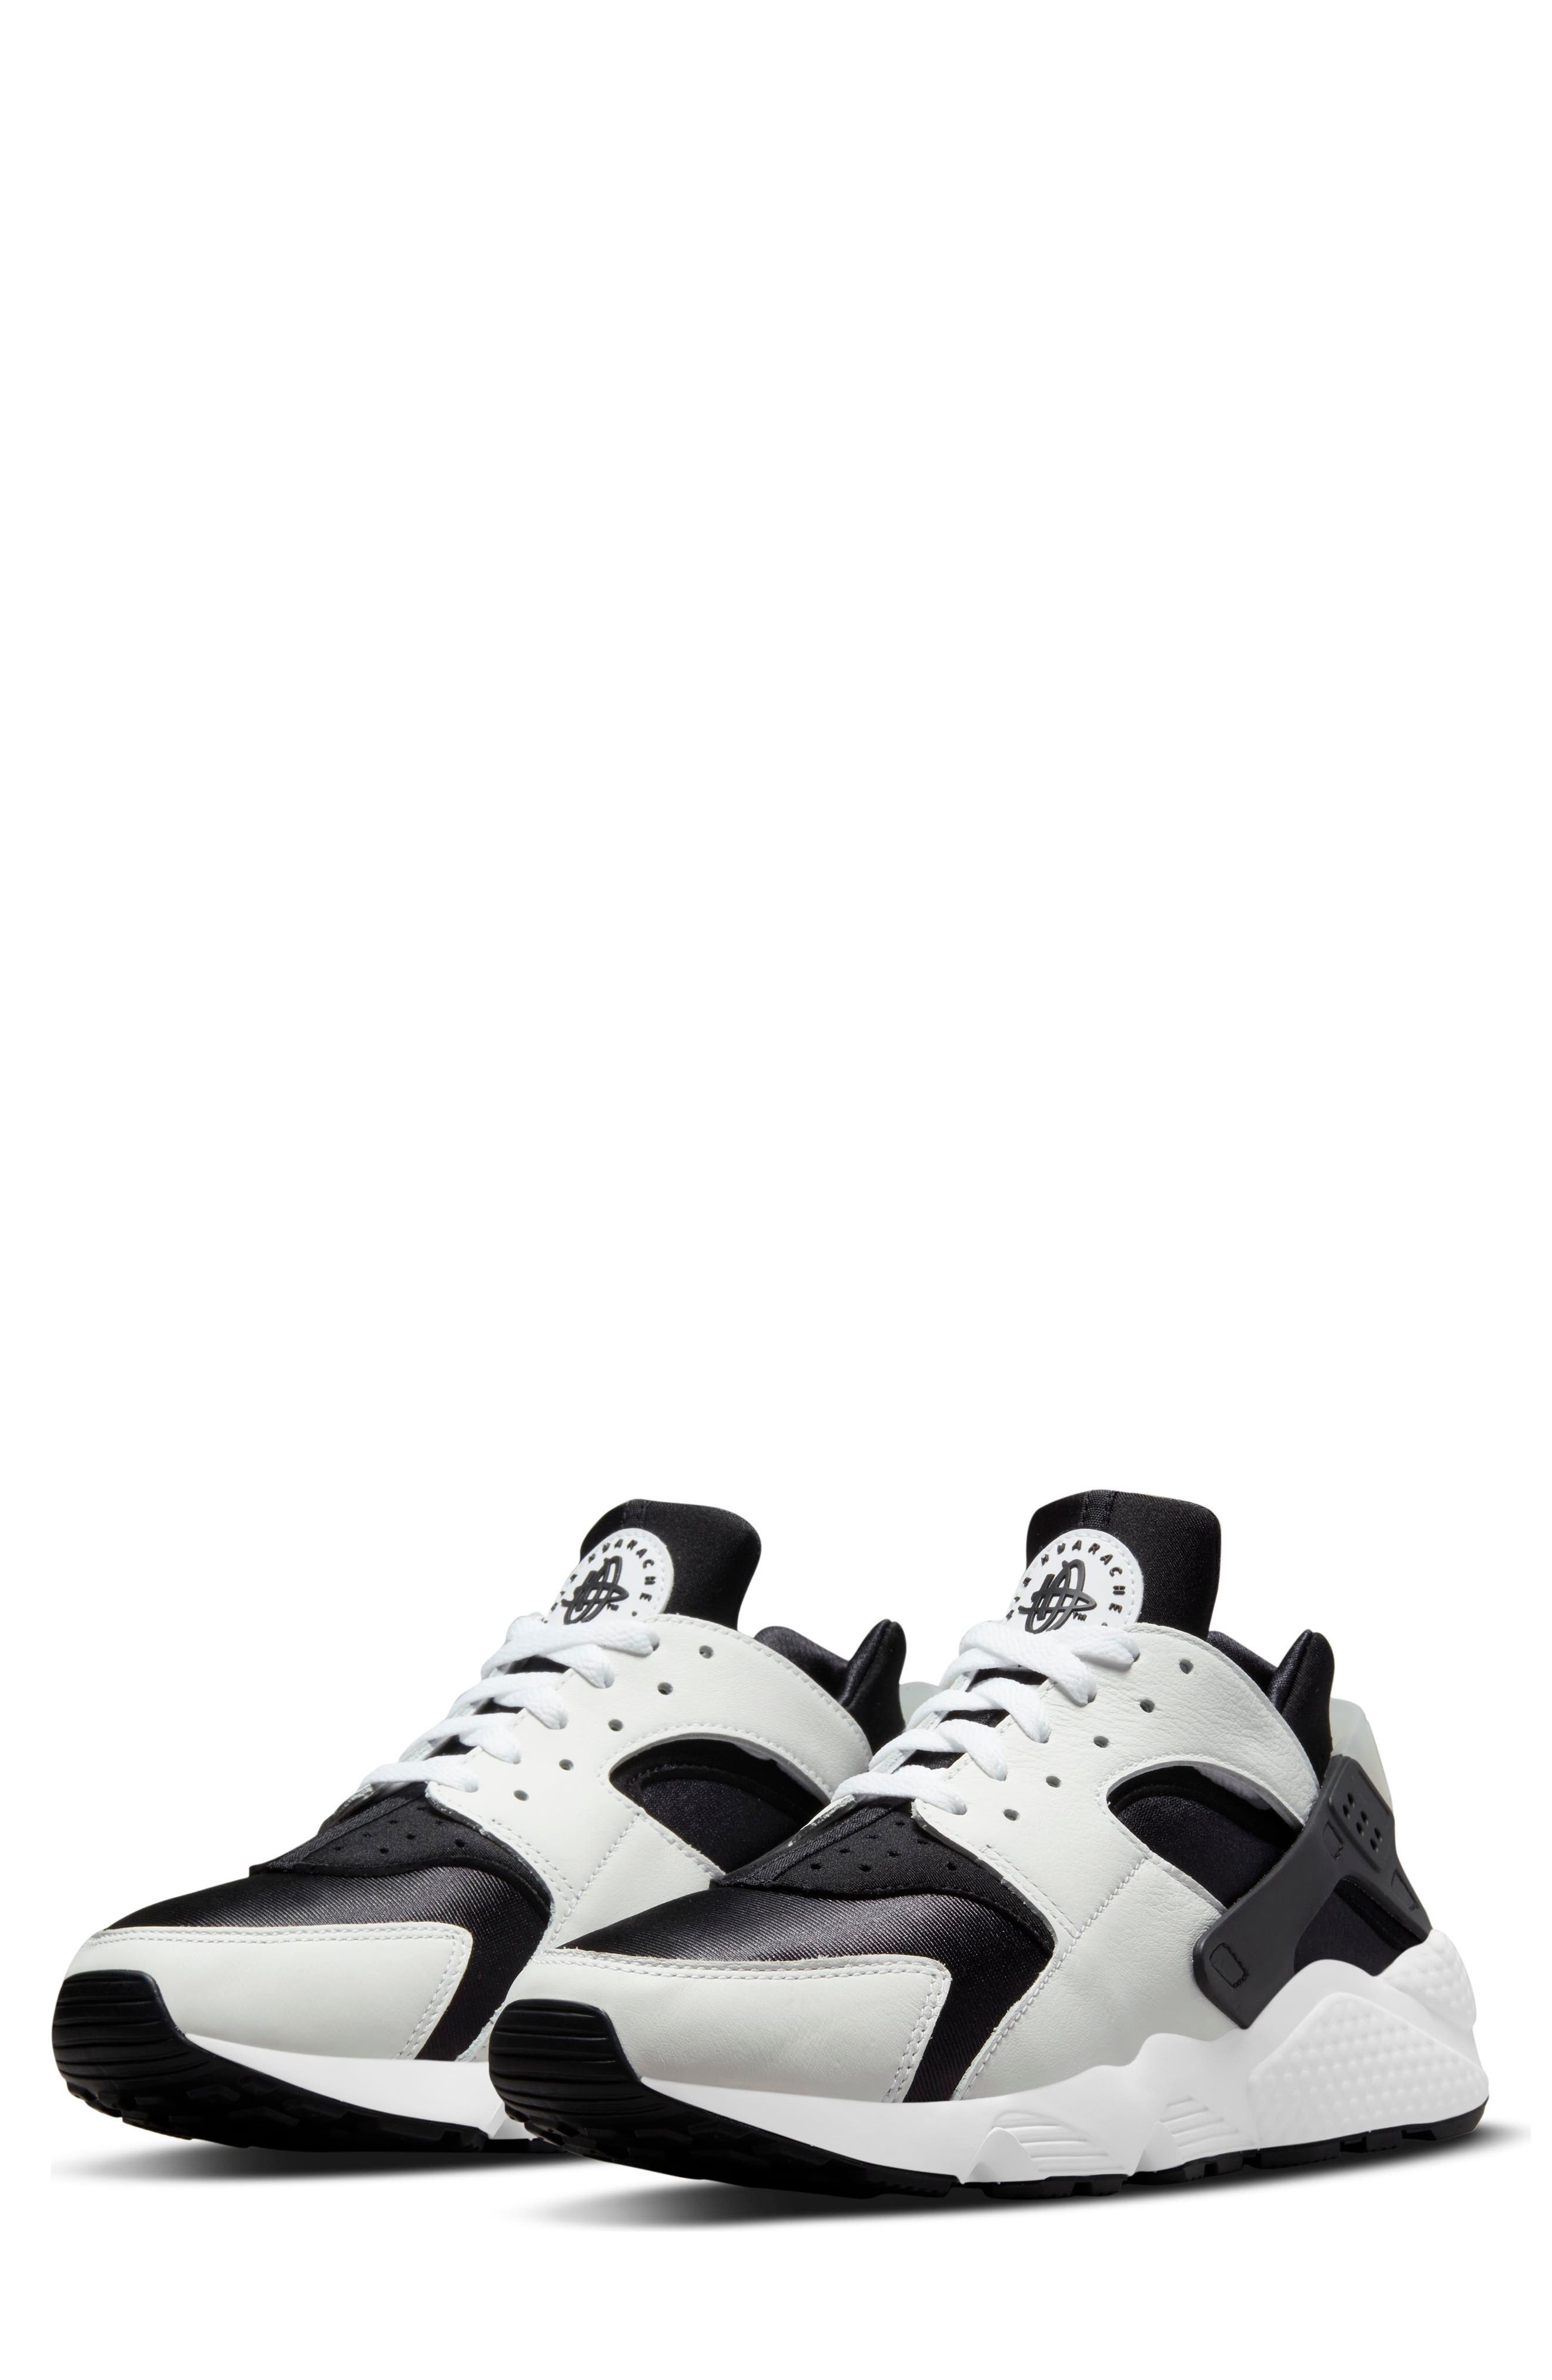 nordstrom huaraches